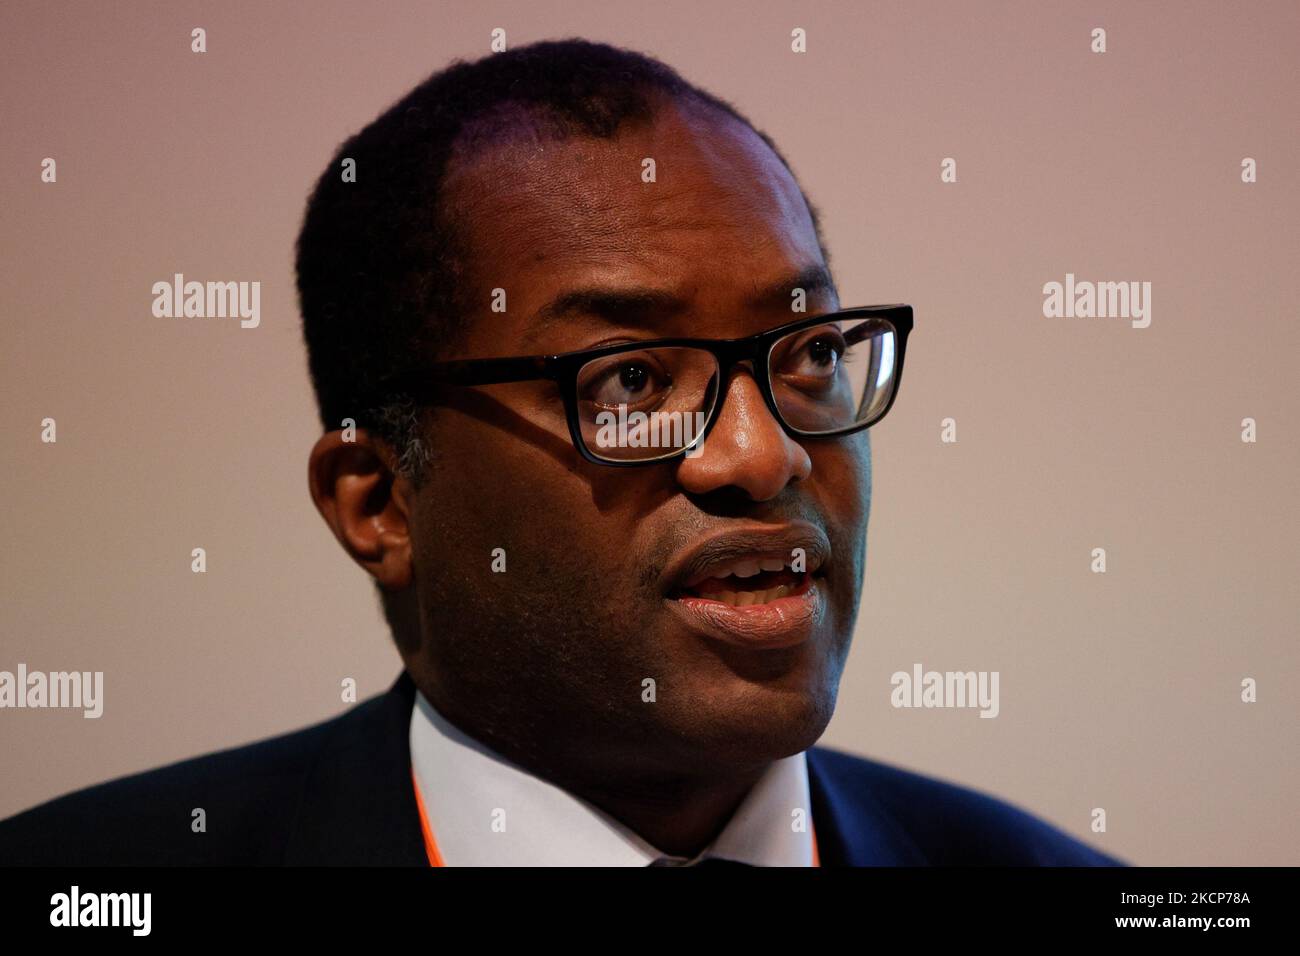 British Secretary of State for Business, Energy and Industrial Strategy Kwasi Kwarteng, Conservative Party MP for Spelthorne, addresses the Energy UK Annual Conference at the One Birdcage Walk events venue in Westminster in London, England, on October 7, 2021. Industry analysts warned today that British households could see energy bills rise by hundreds of pounds next year as record wholesale prices are passed on to consumers. (Photo by David Cliff/NurPhoto) Stock Photo